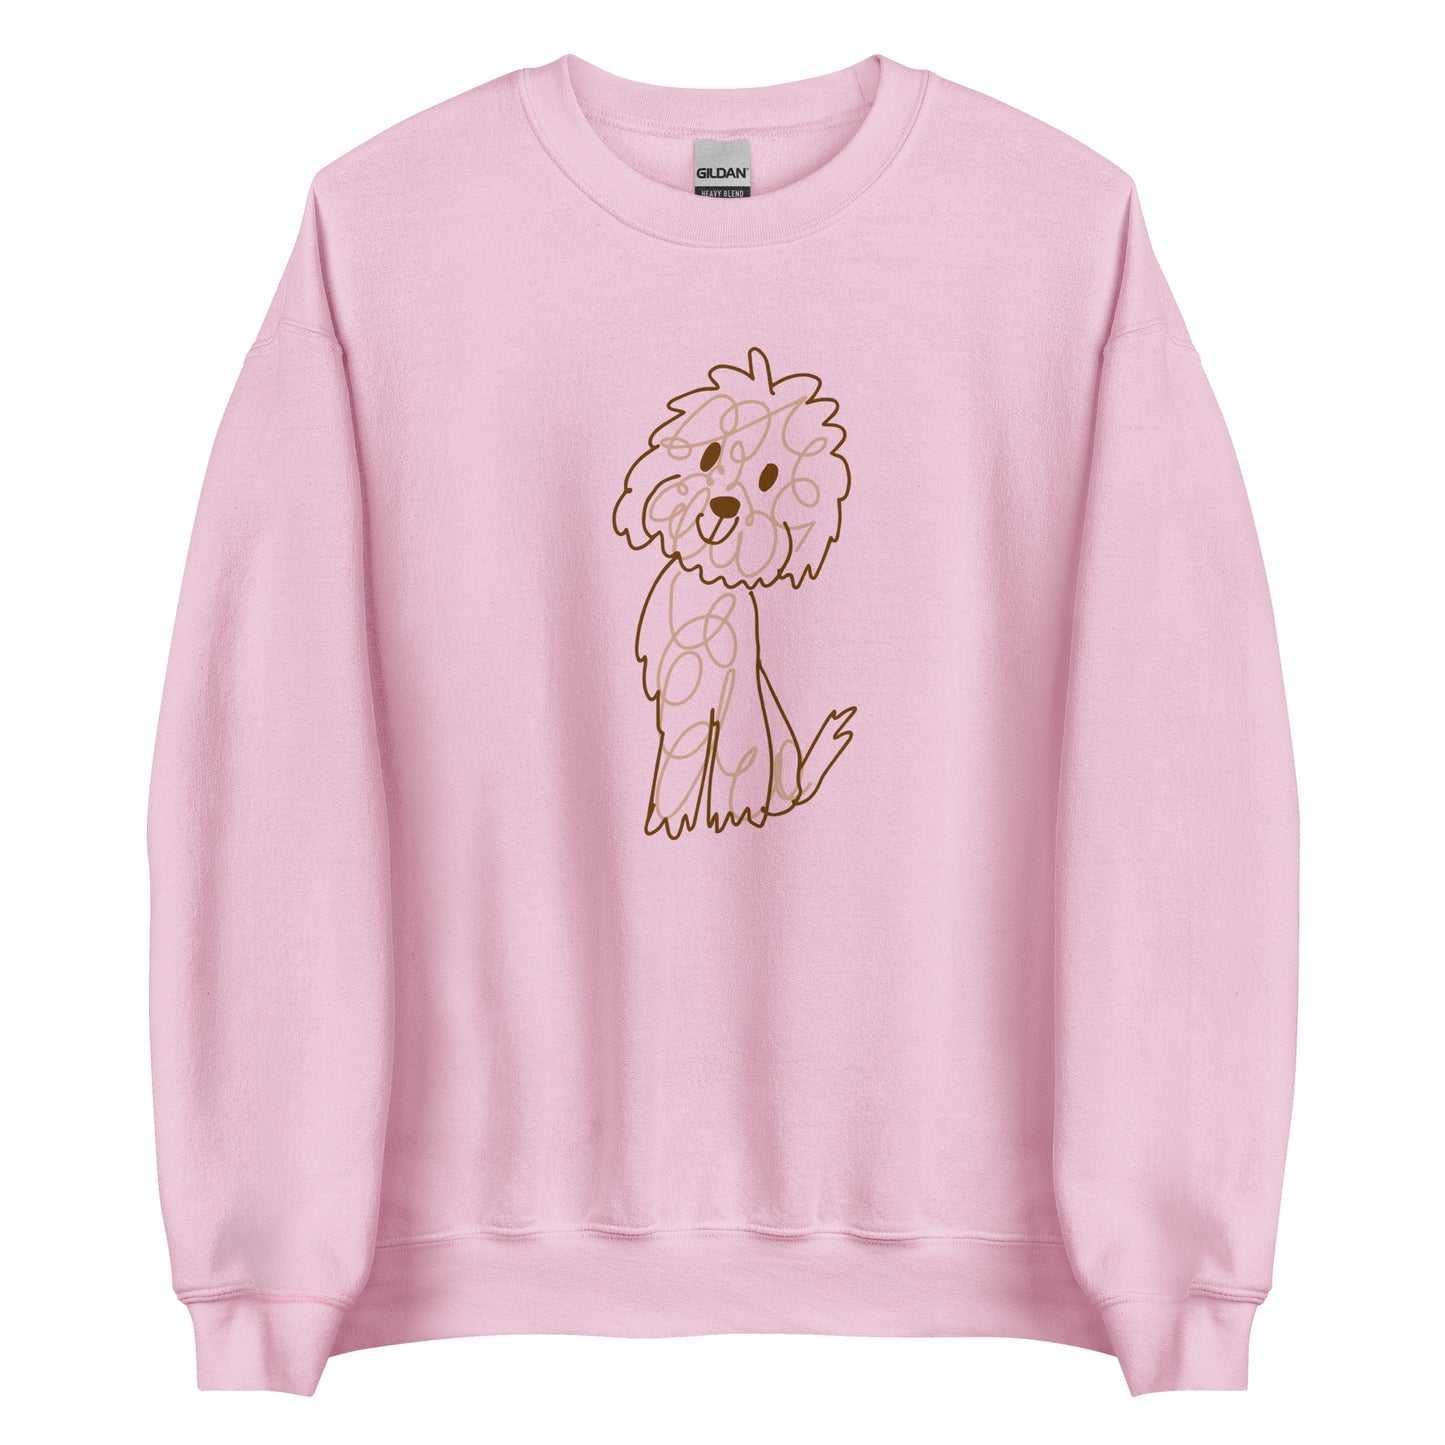 Crew Neck Sweatshirt with doodle dog drawn with fine lines light pink color